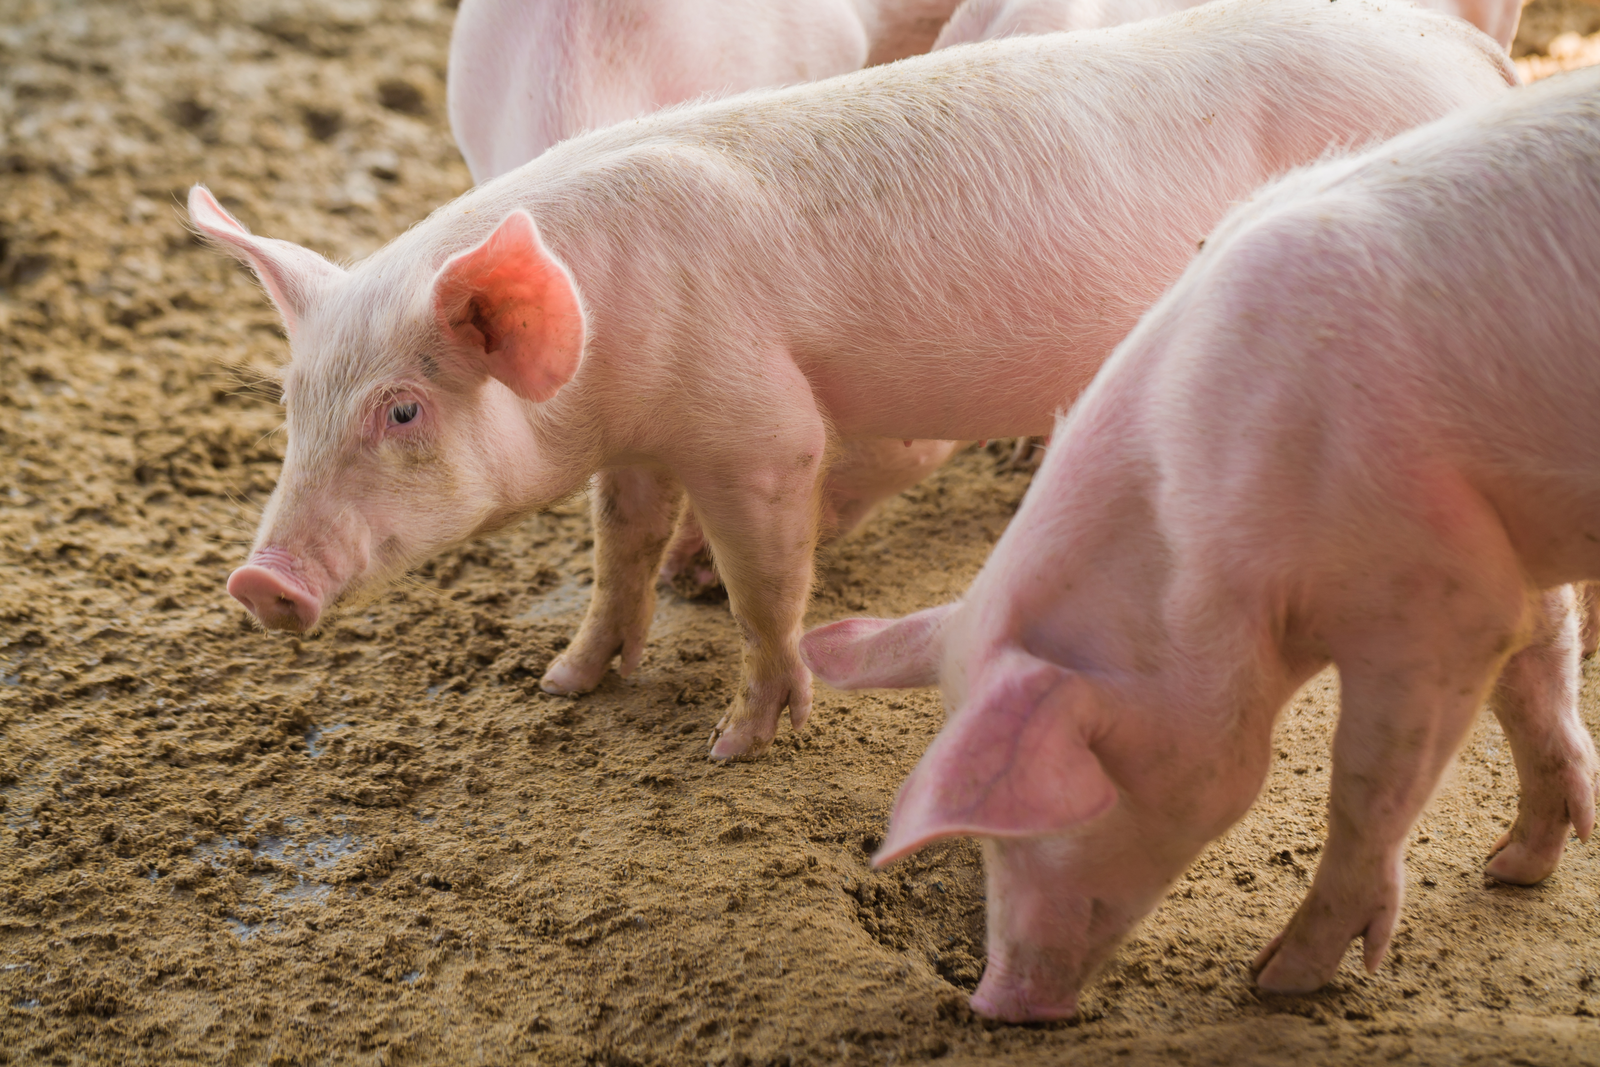 In piglets higher levels of ZnO in feed are needed to meet their requirements.